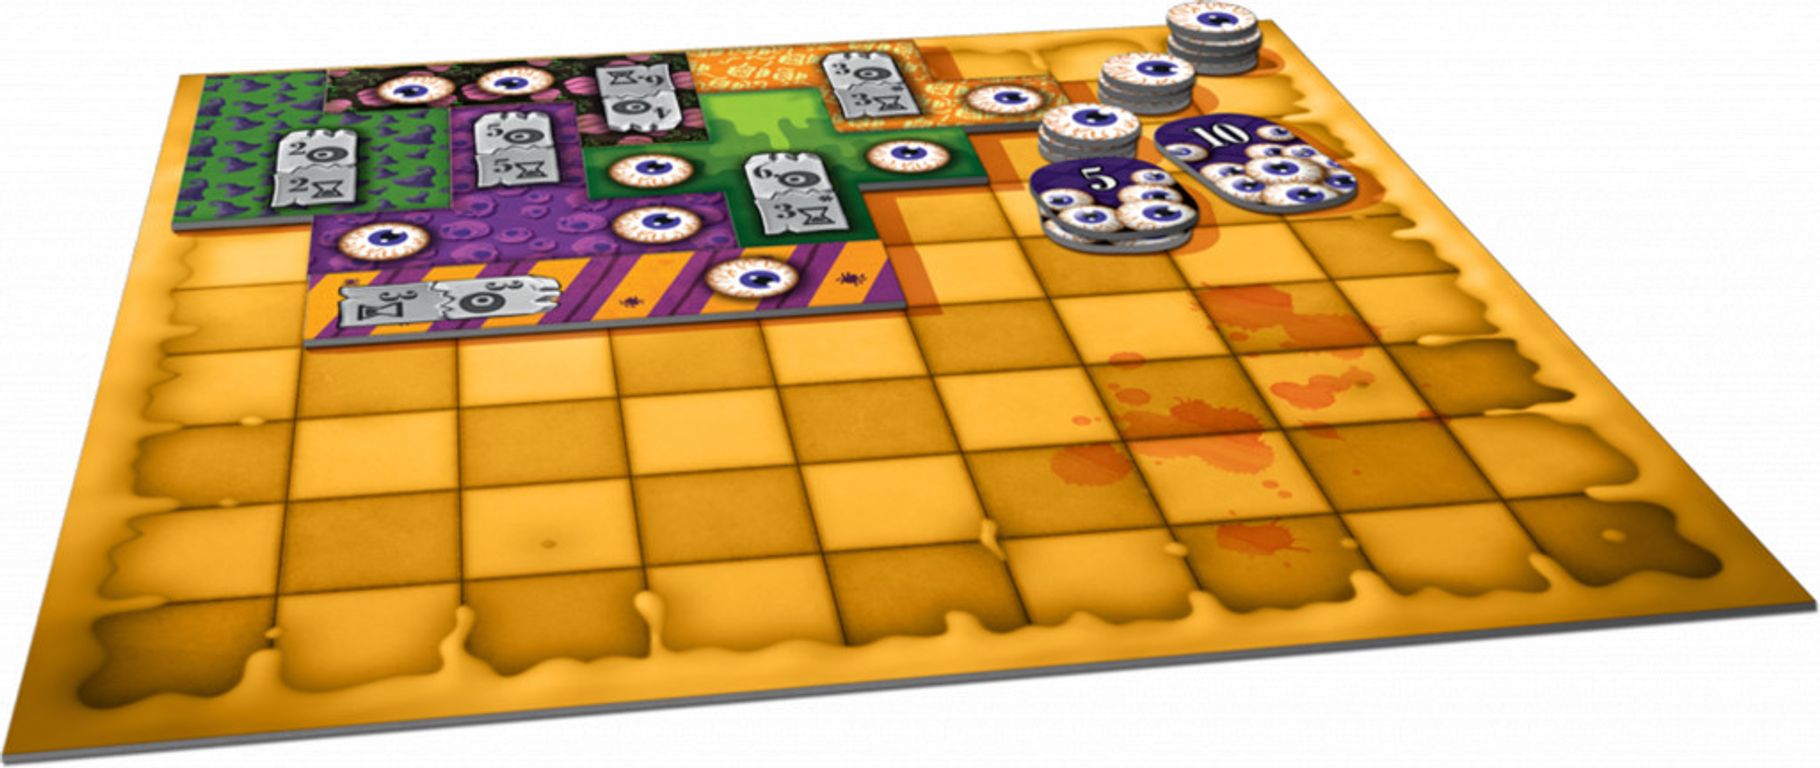 Patchwork: Halloween Edition components